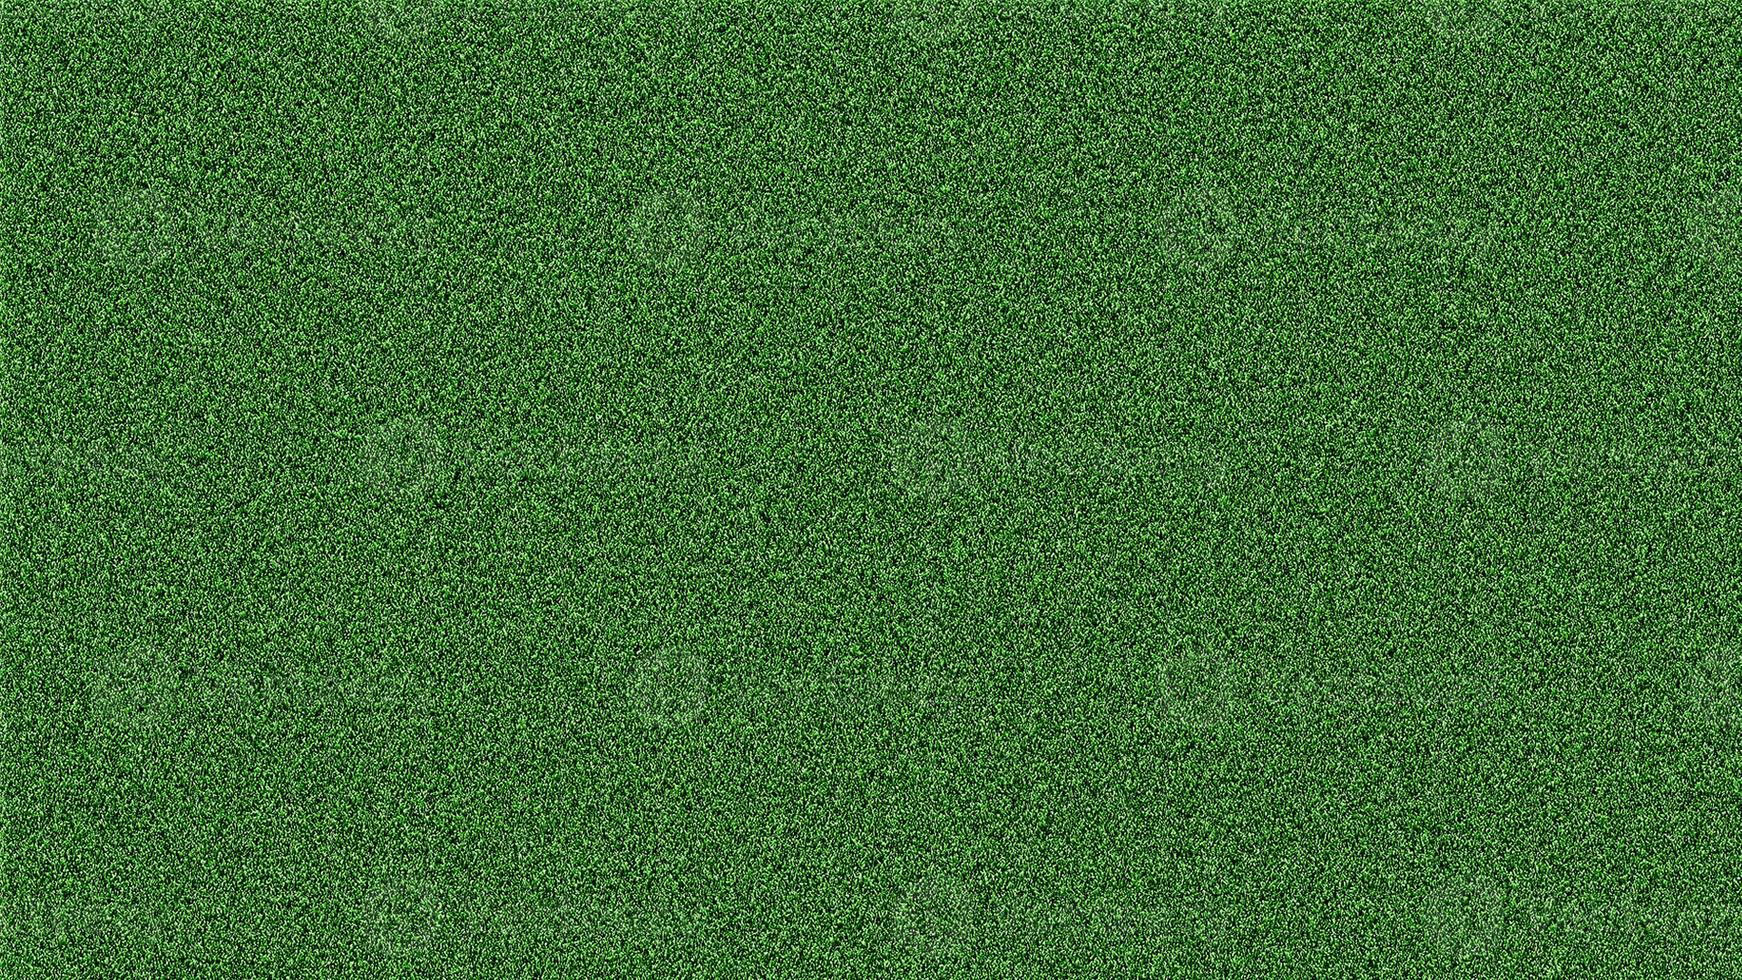 Artificial green grass texture and pattern background photo